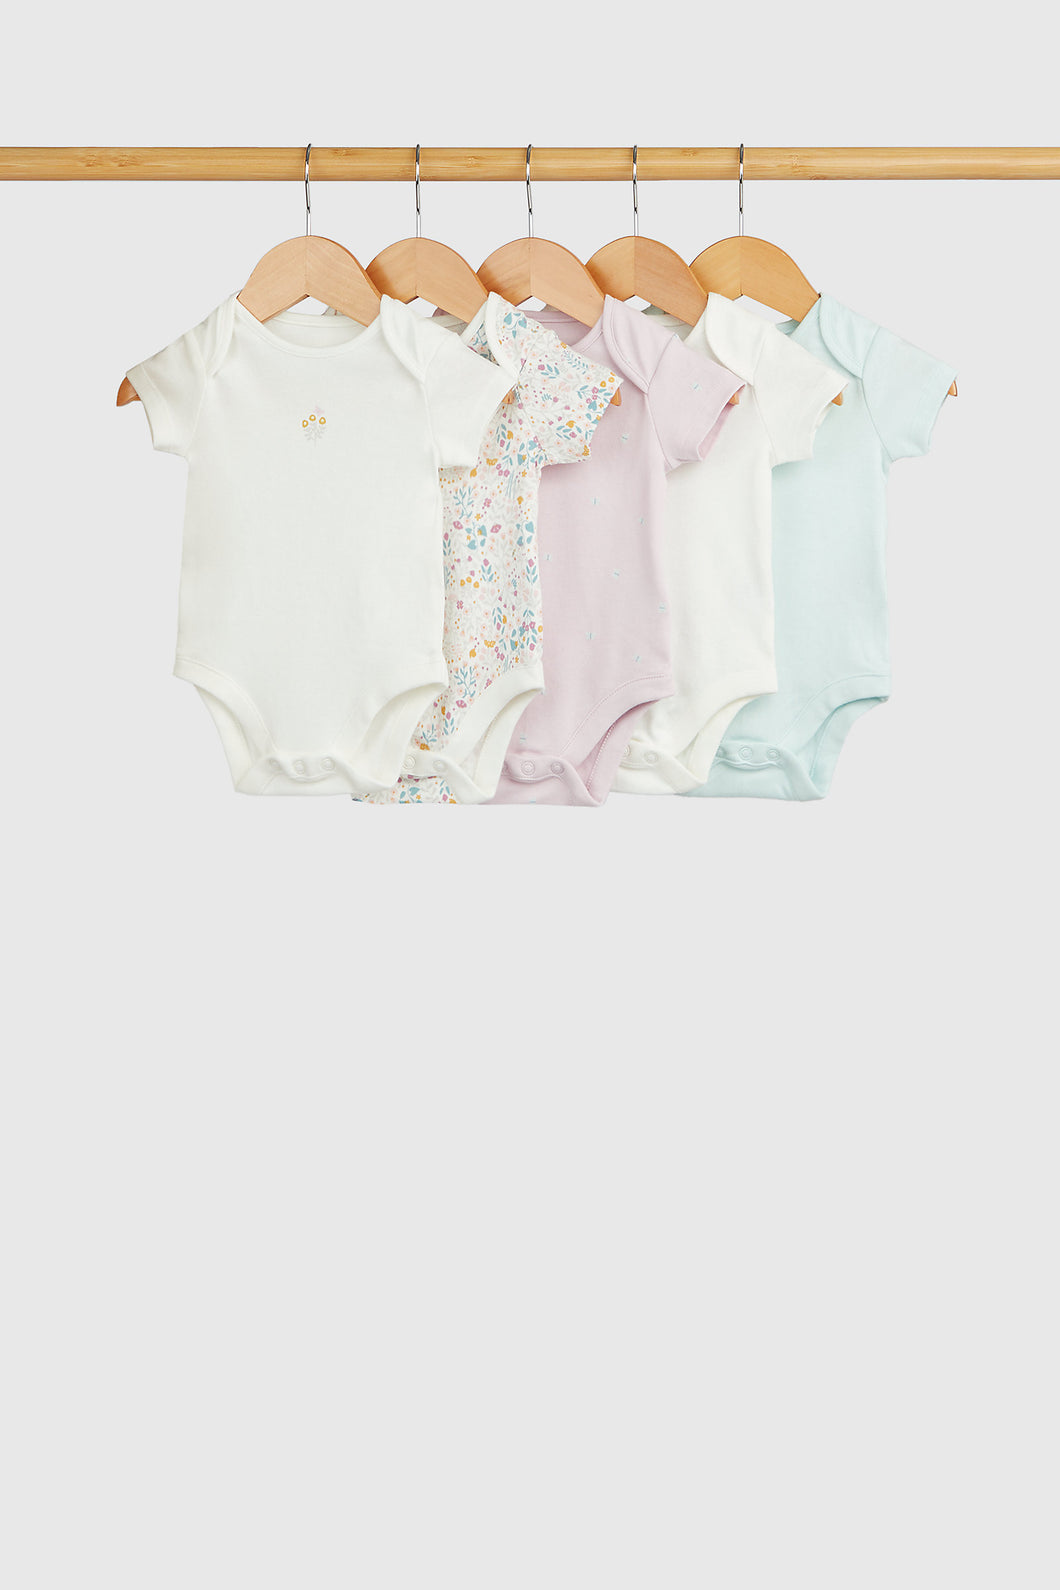 Mothercare Wild Flowers Short-Sleeved Bodysuits - 5 Pack